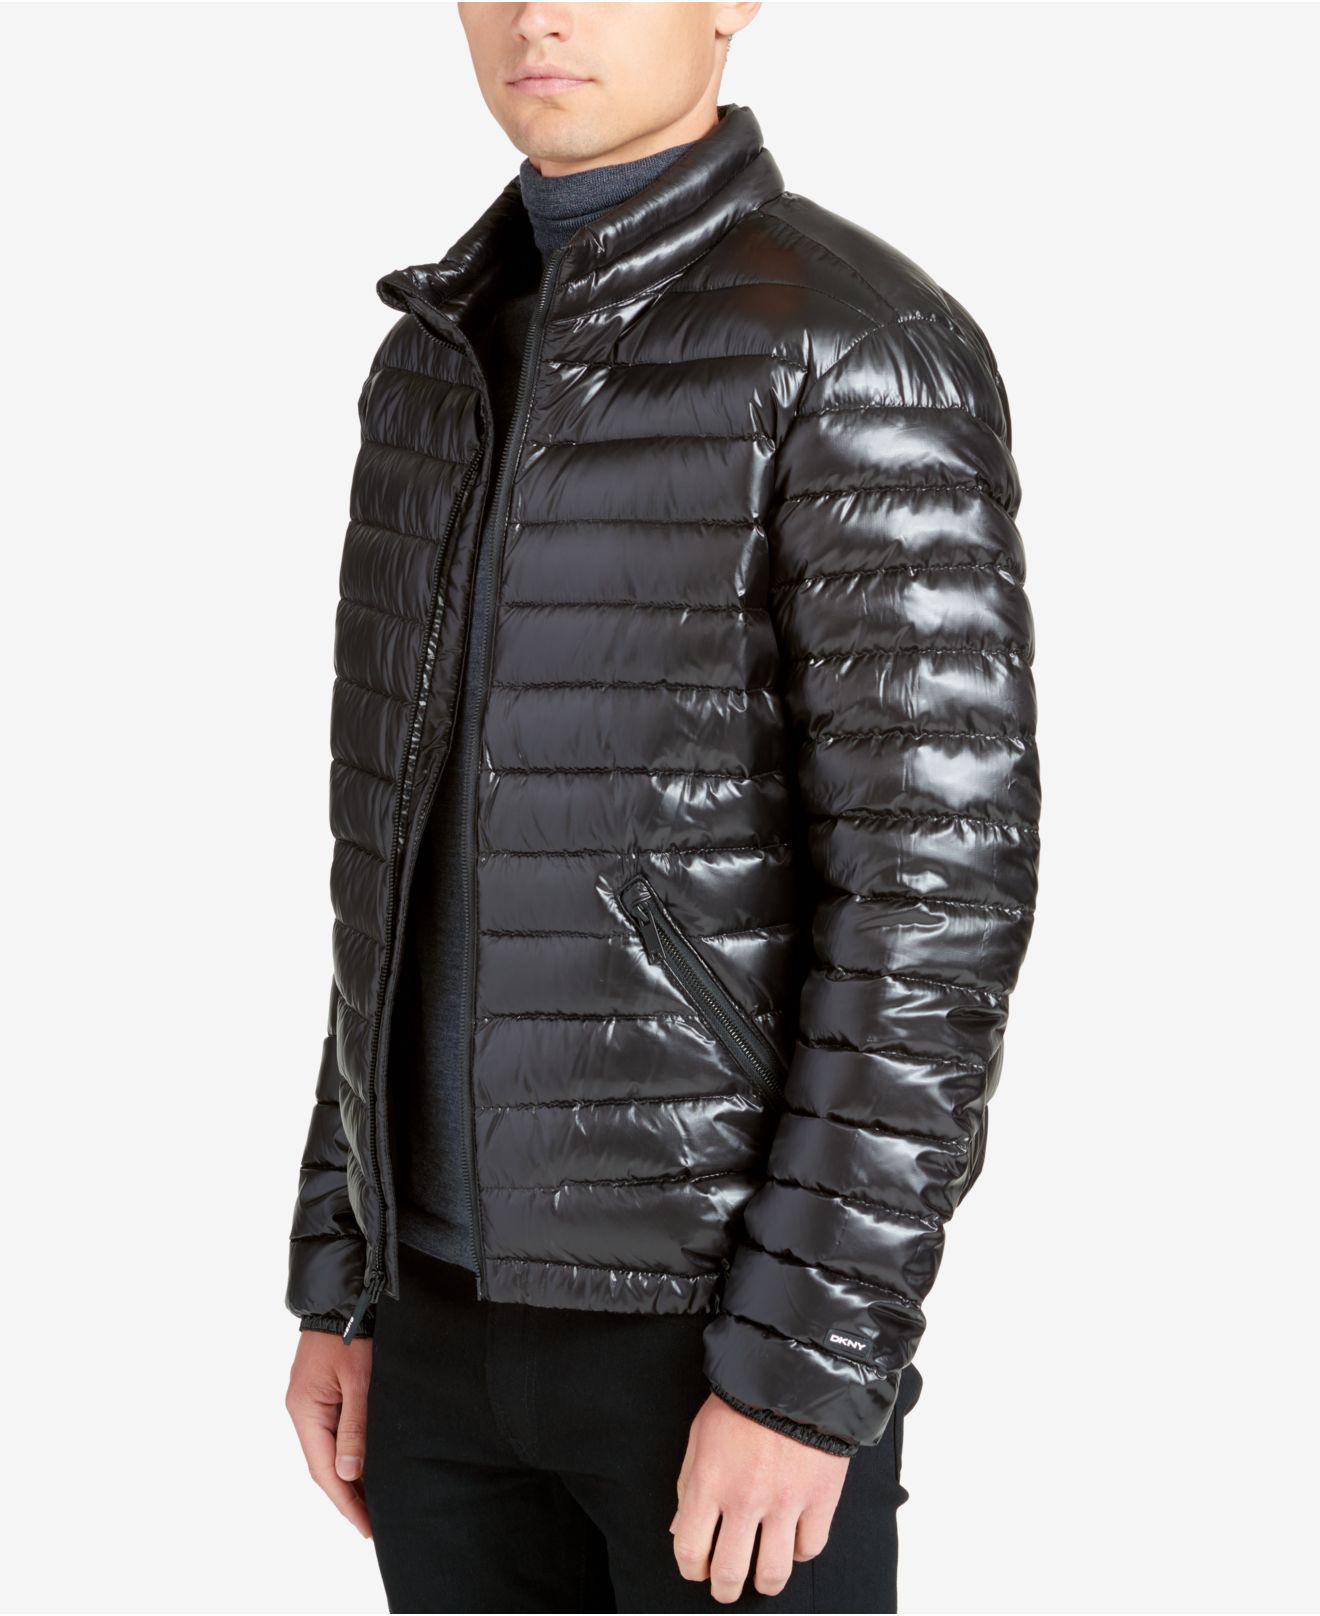 Zara QUILTED JACKET Square One | lupon.gov.ph